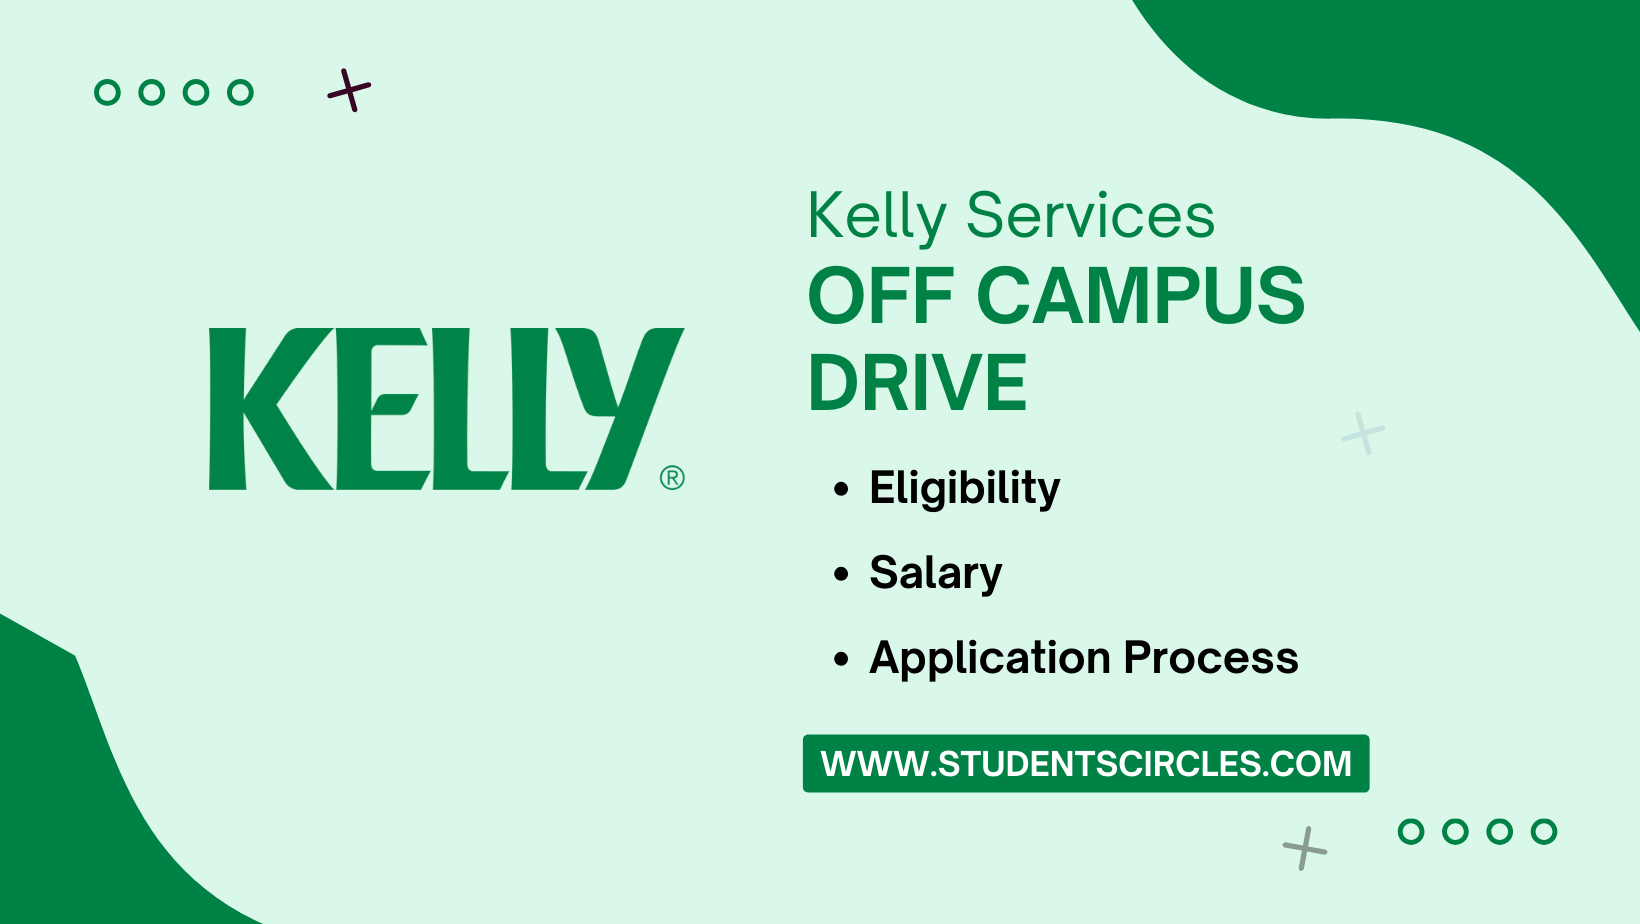 Kelly Services Off Campus Drive